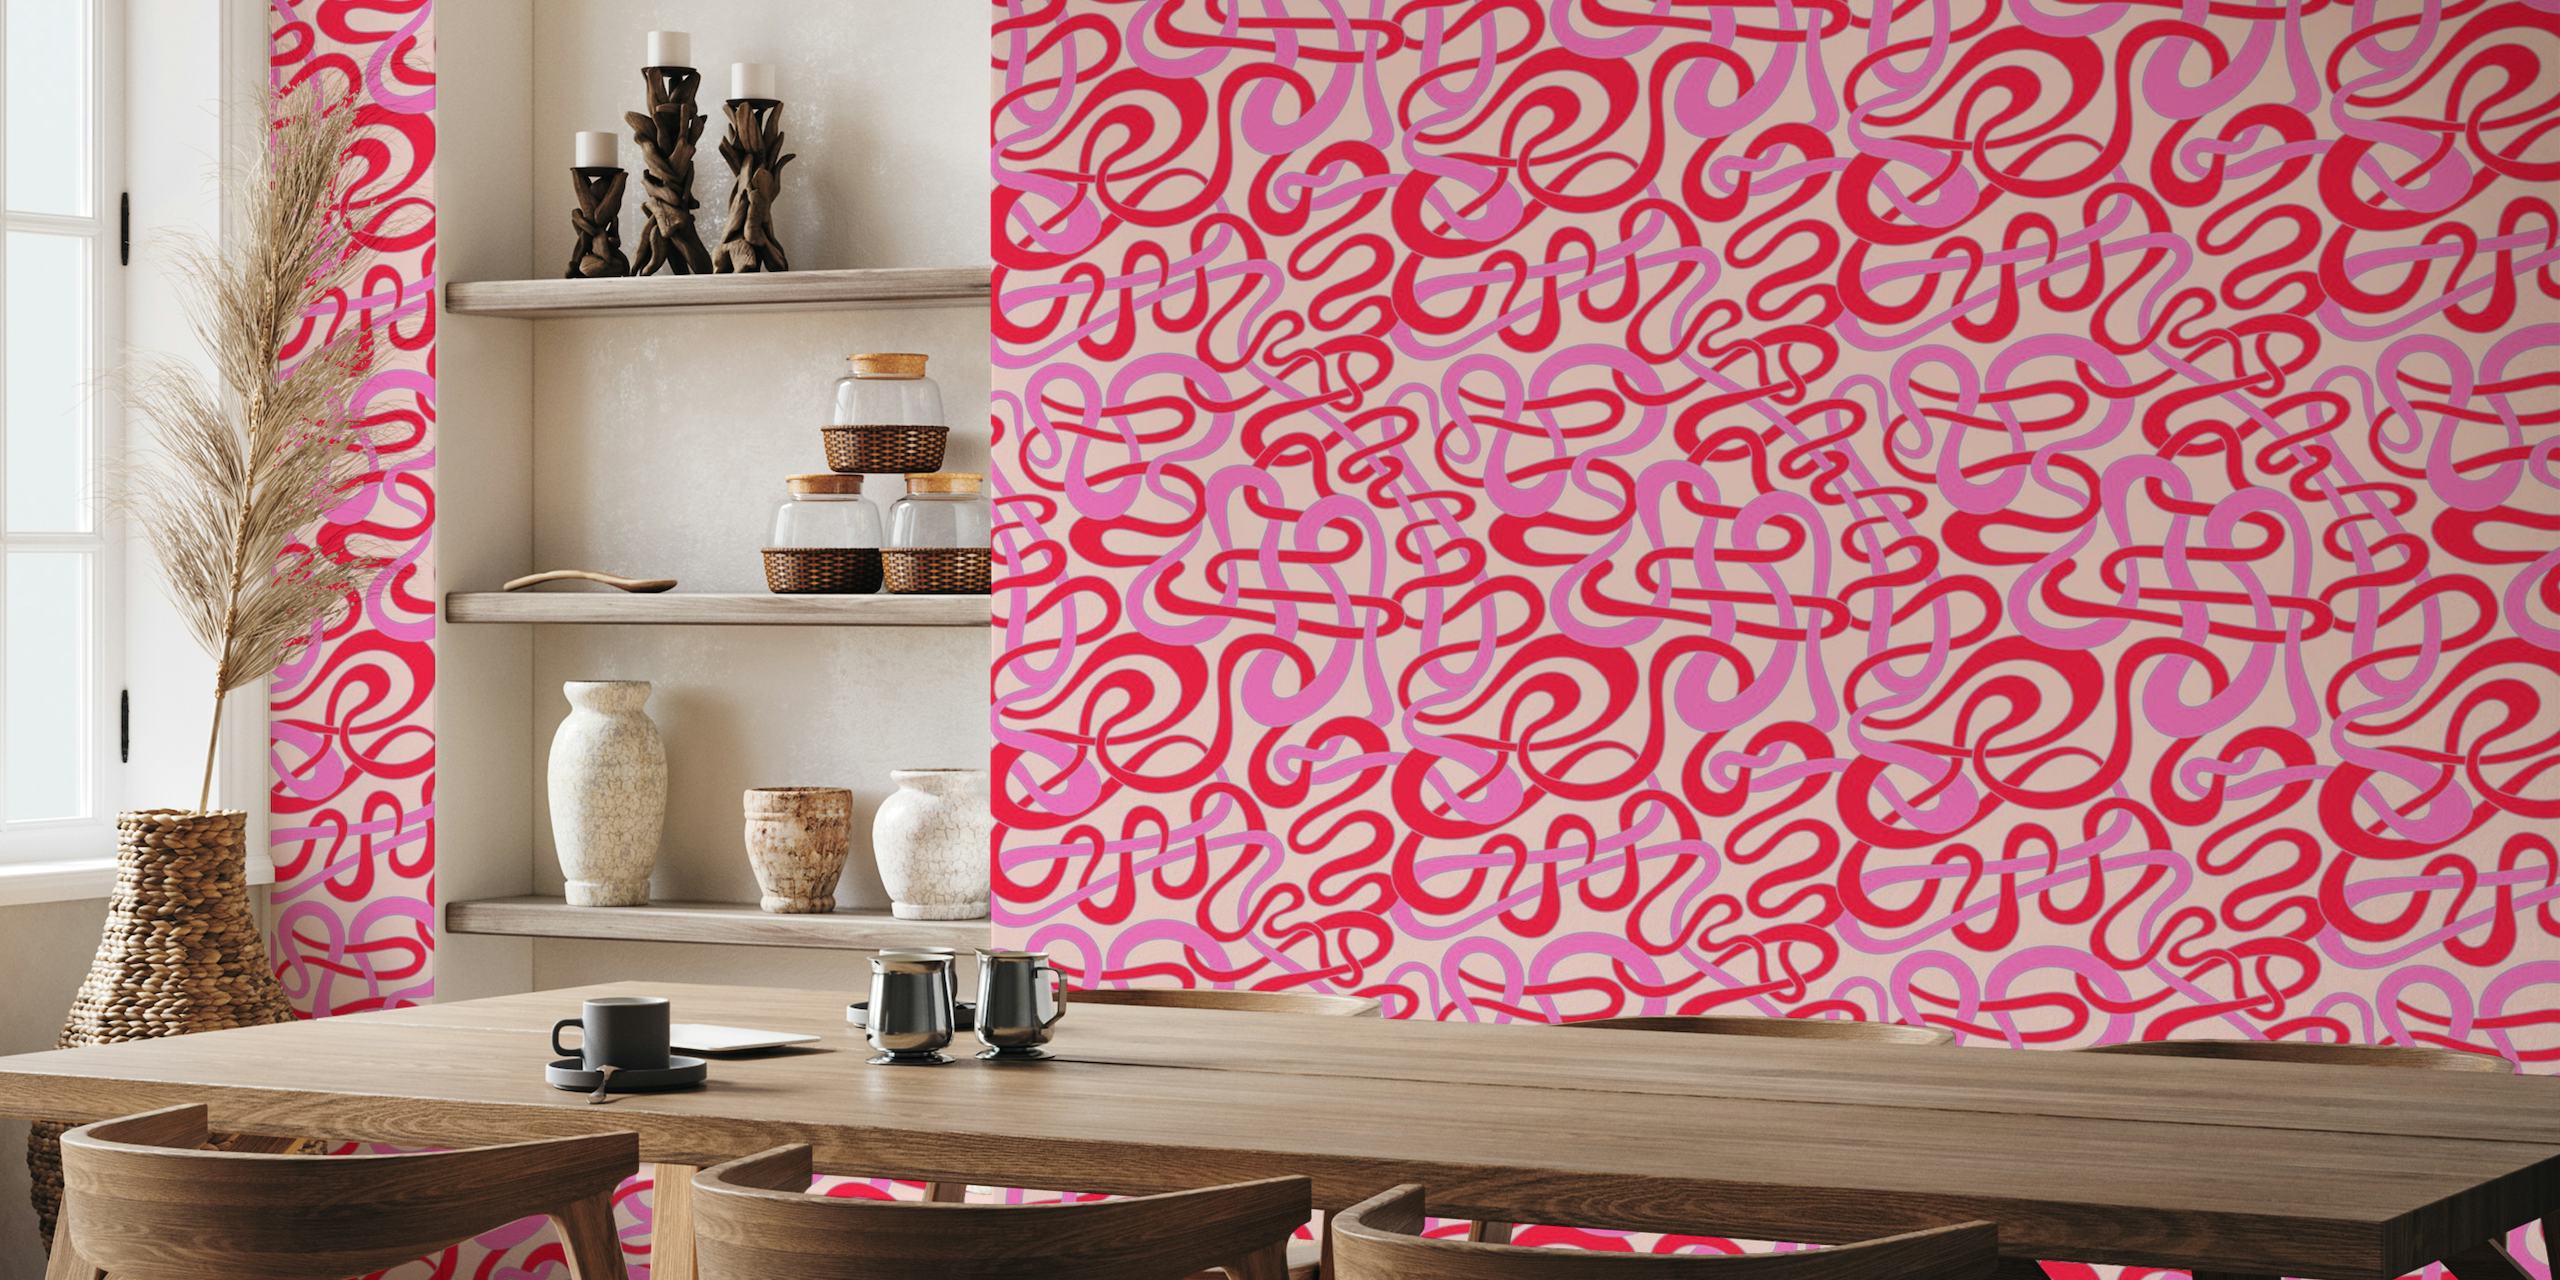 TANGLED STRIPES Abstract Hot Fuchsia Pink Red wallpaper